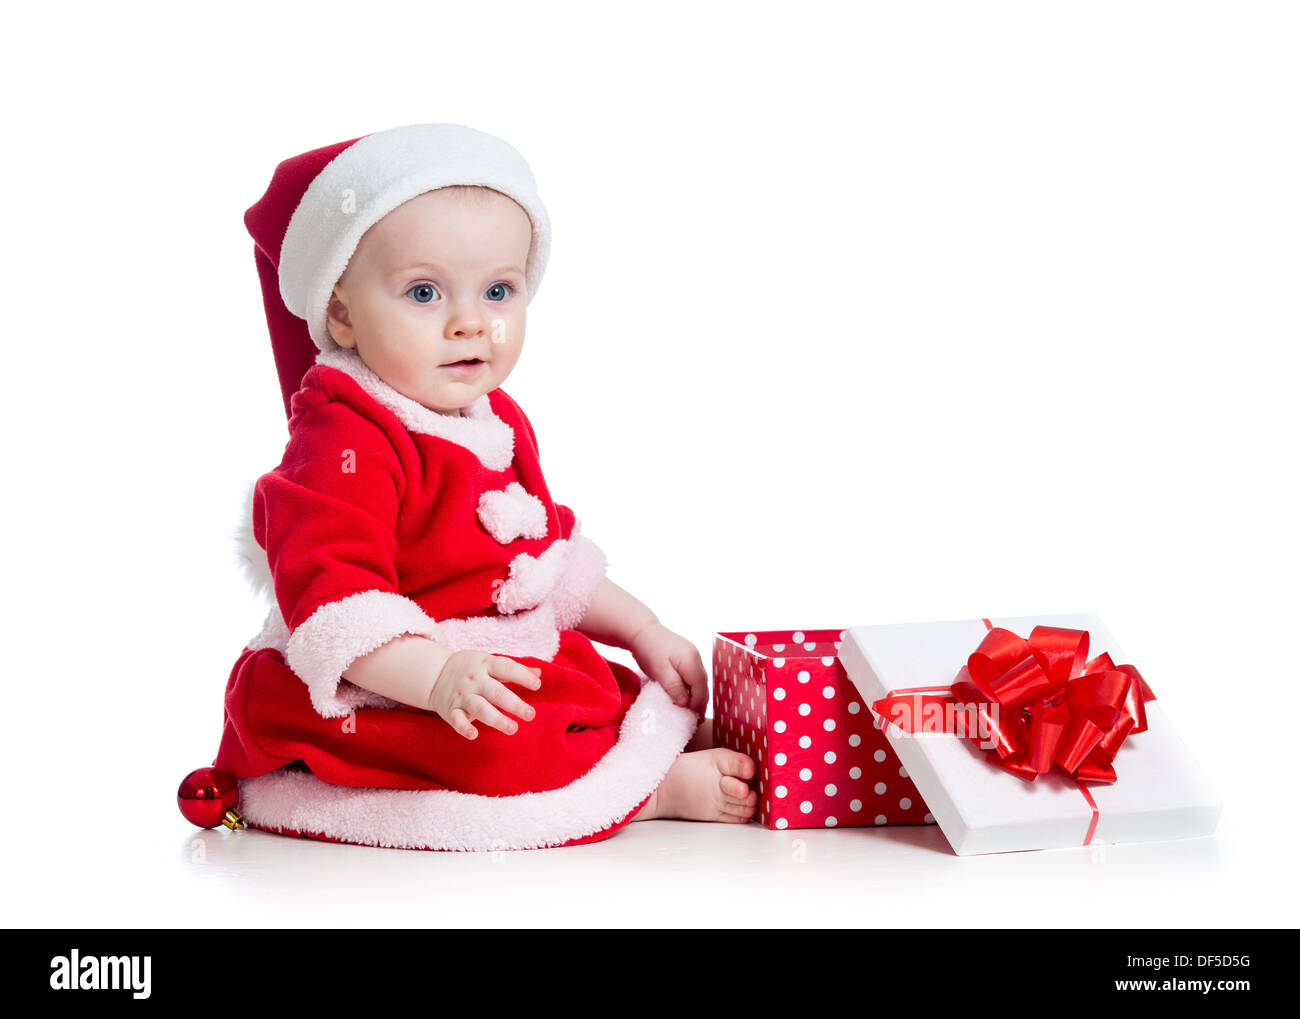 X-mas baby girl opening gift box isolé sur fond blanc Banque D'Images